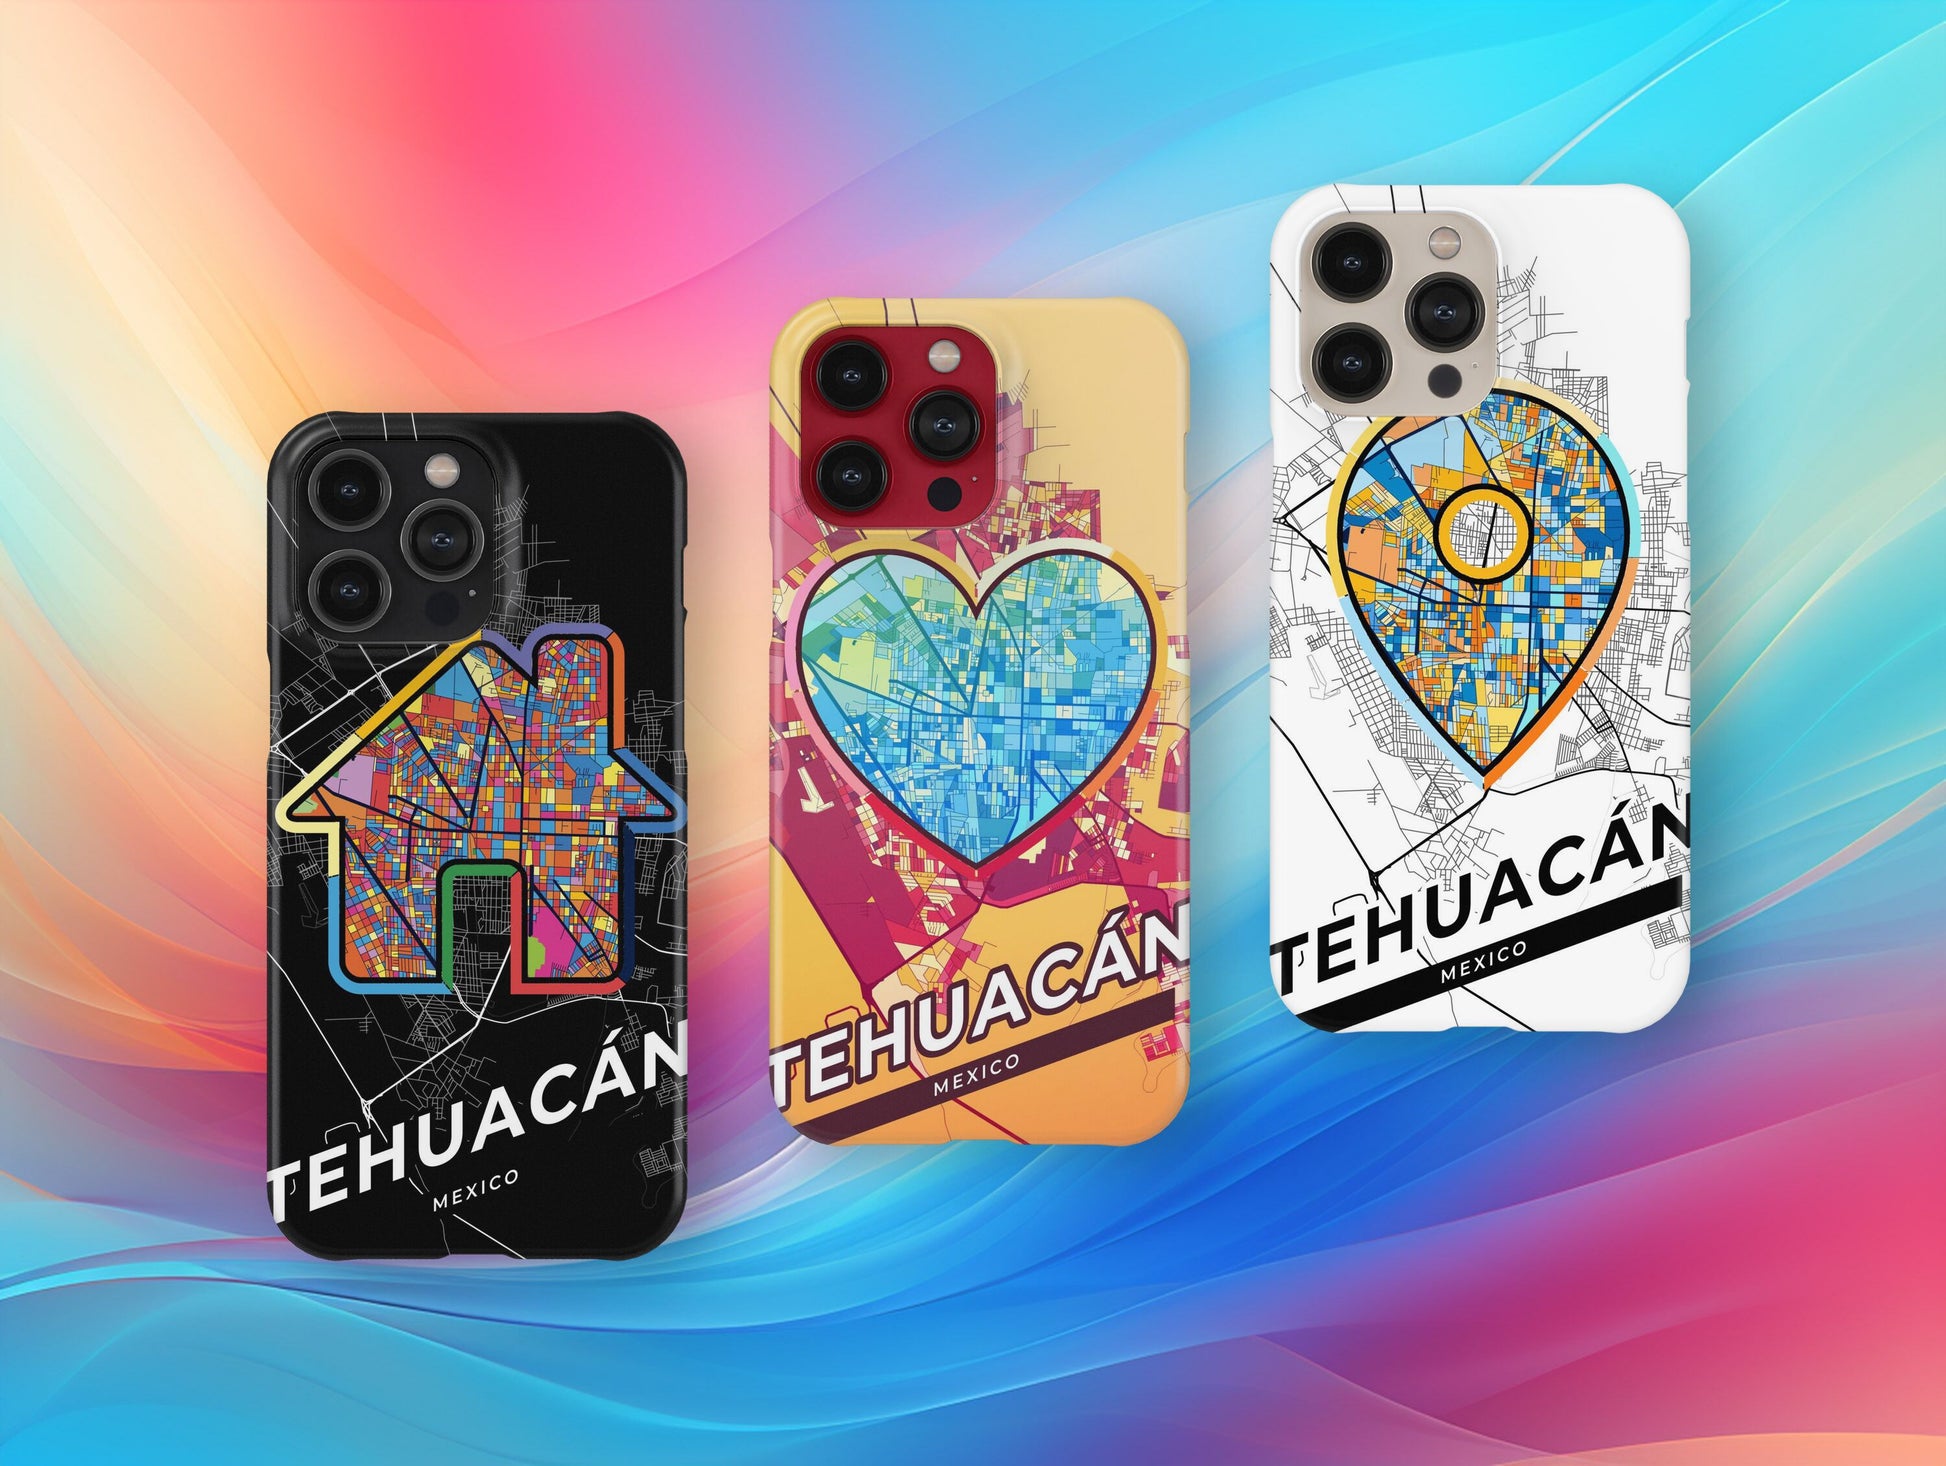 Tehuacán Mexico slim phone case with colorful icon